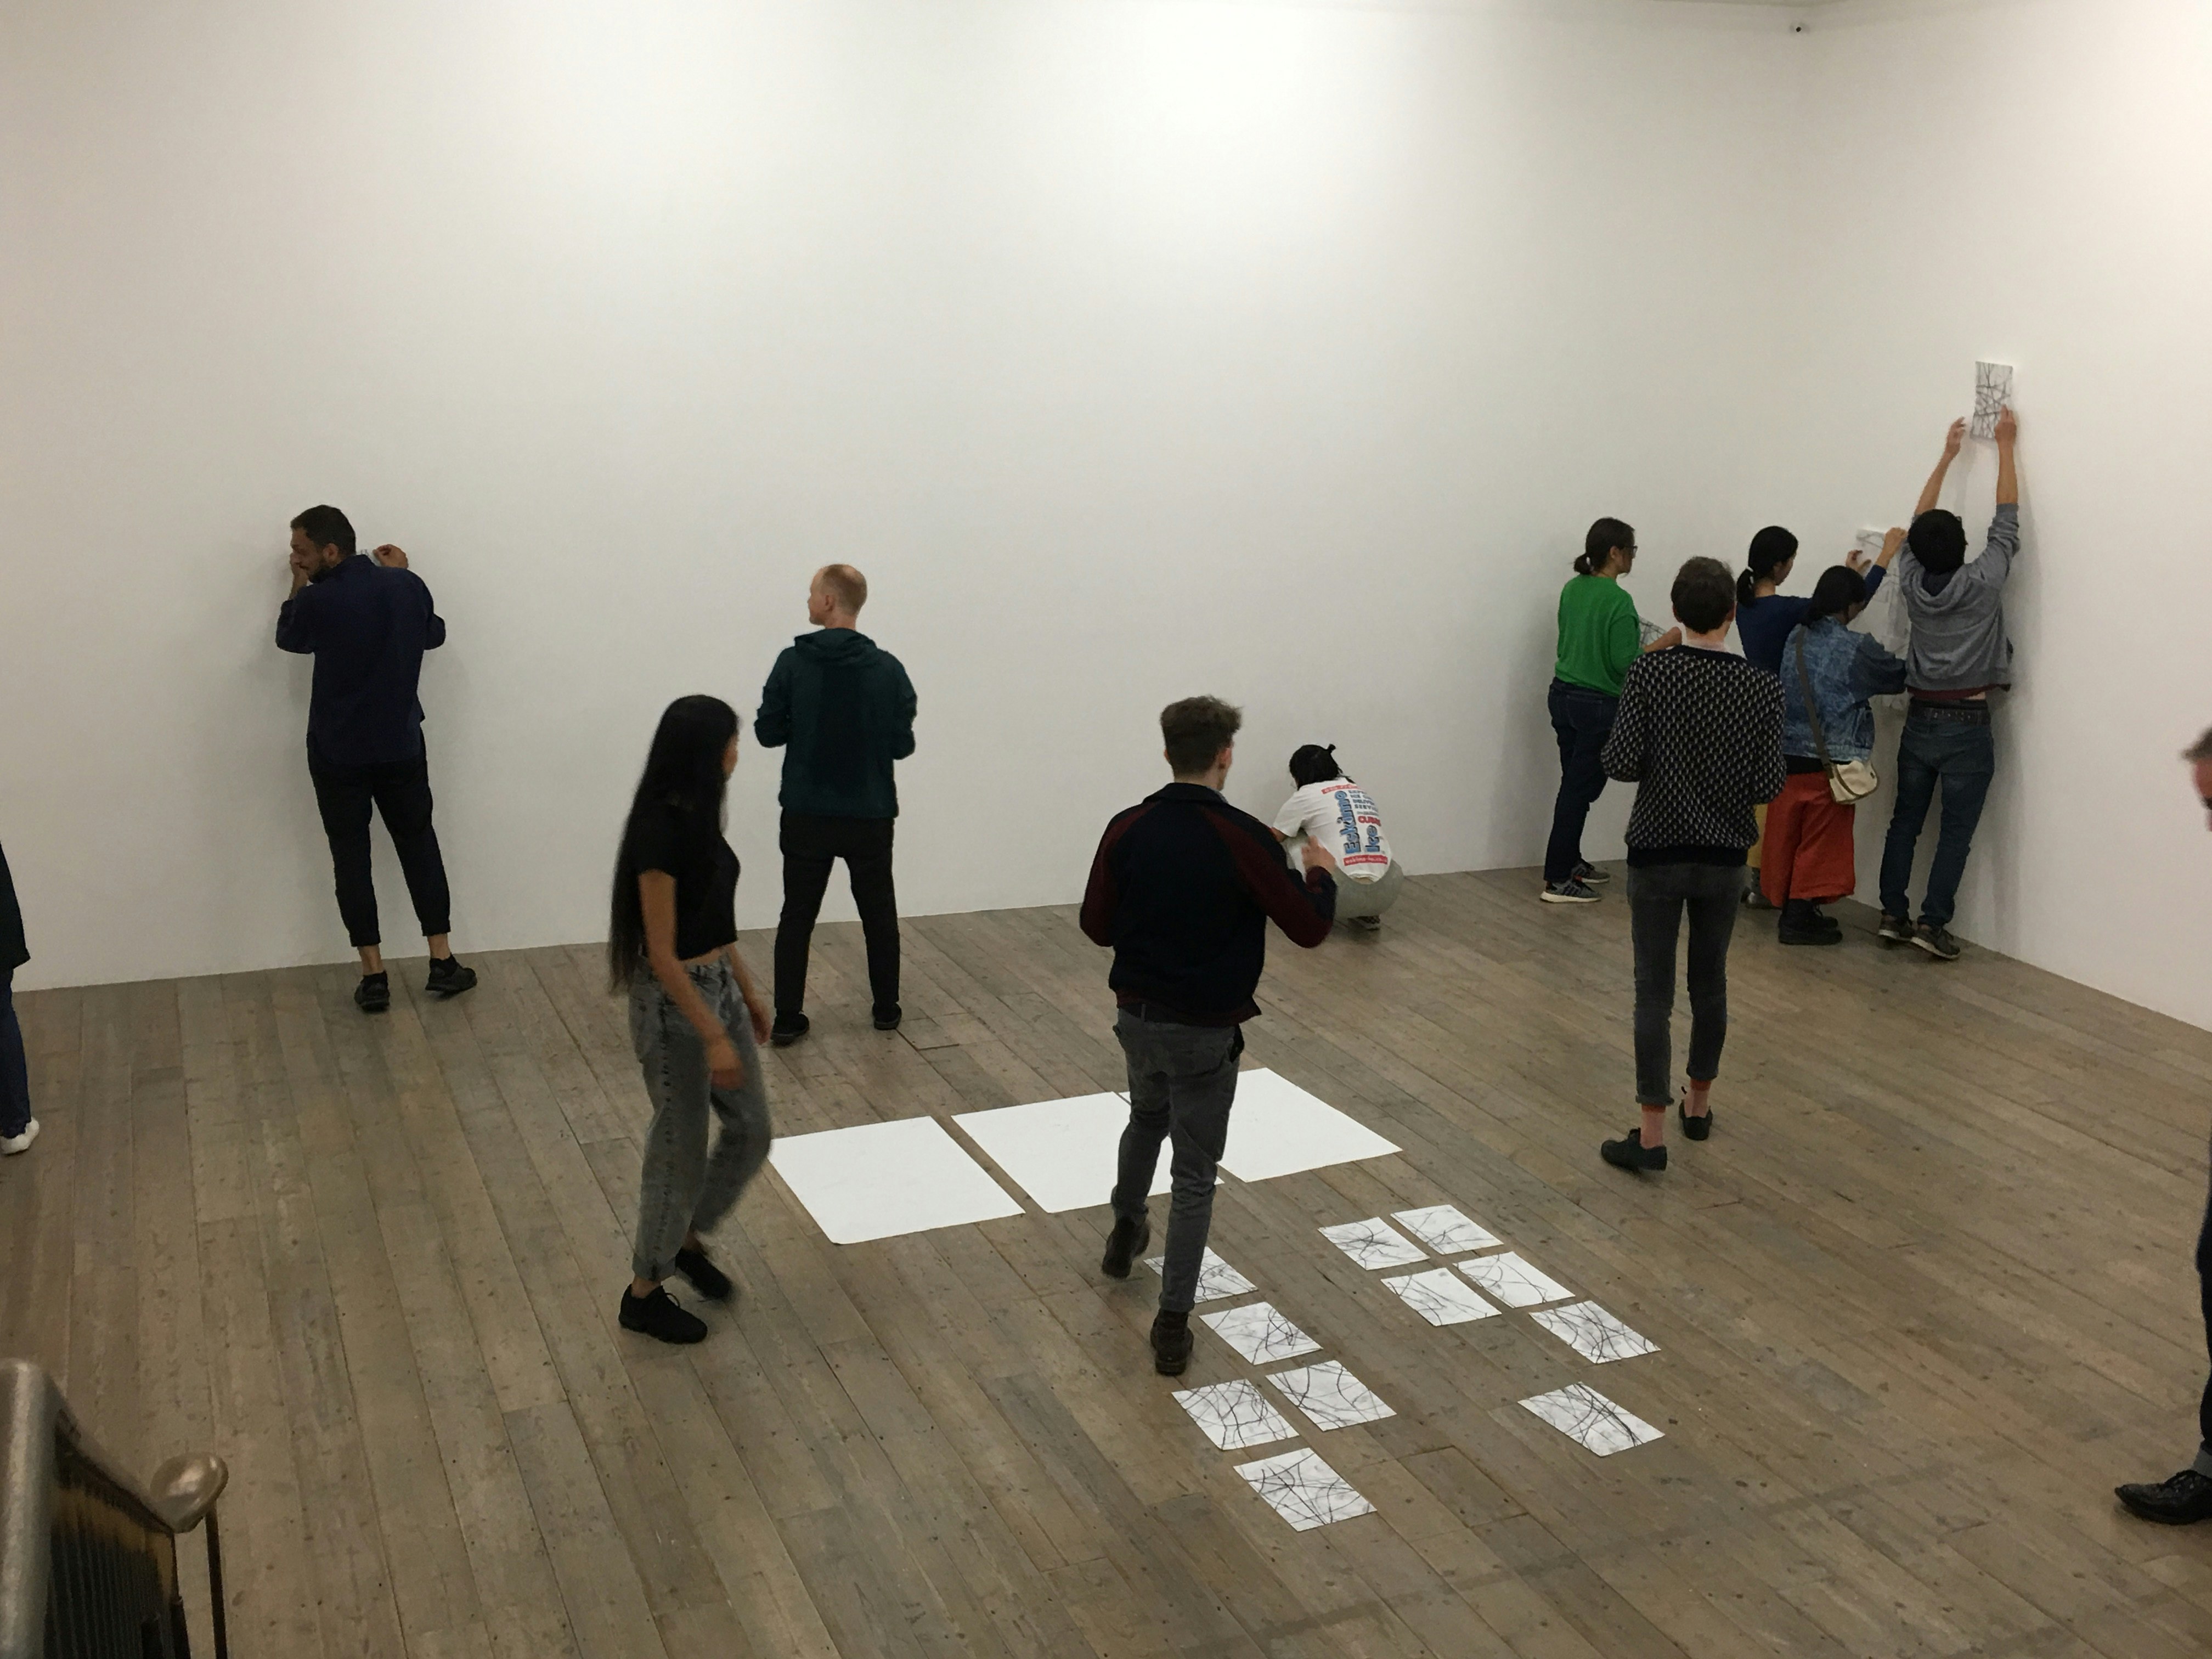 A group of gallery patrons placing A4 pieces of paper on the walls.